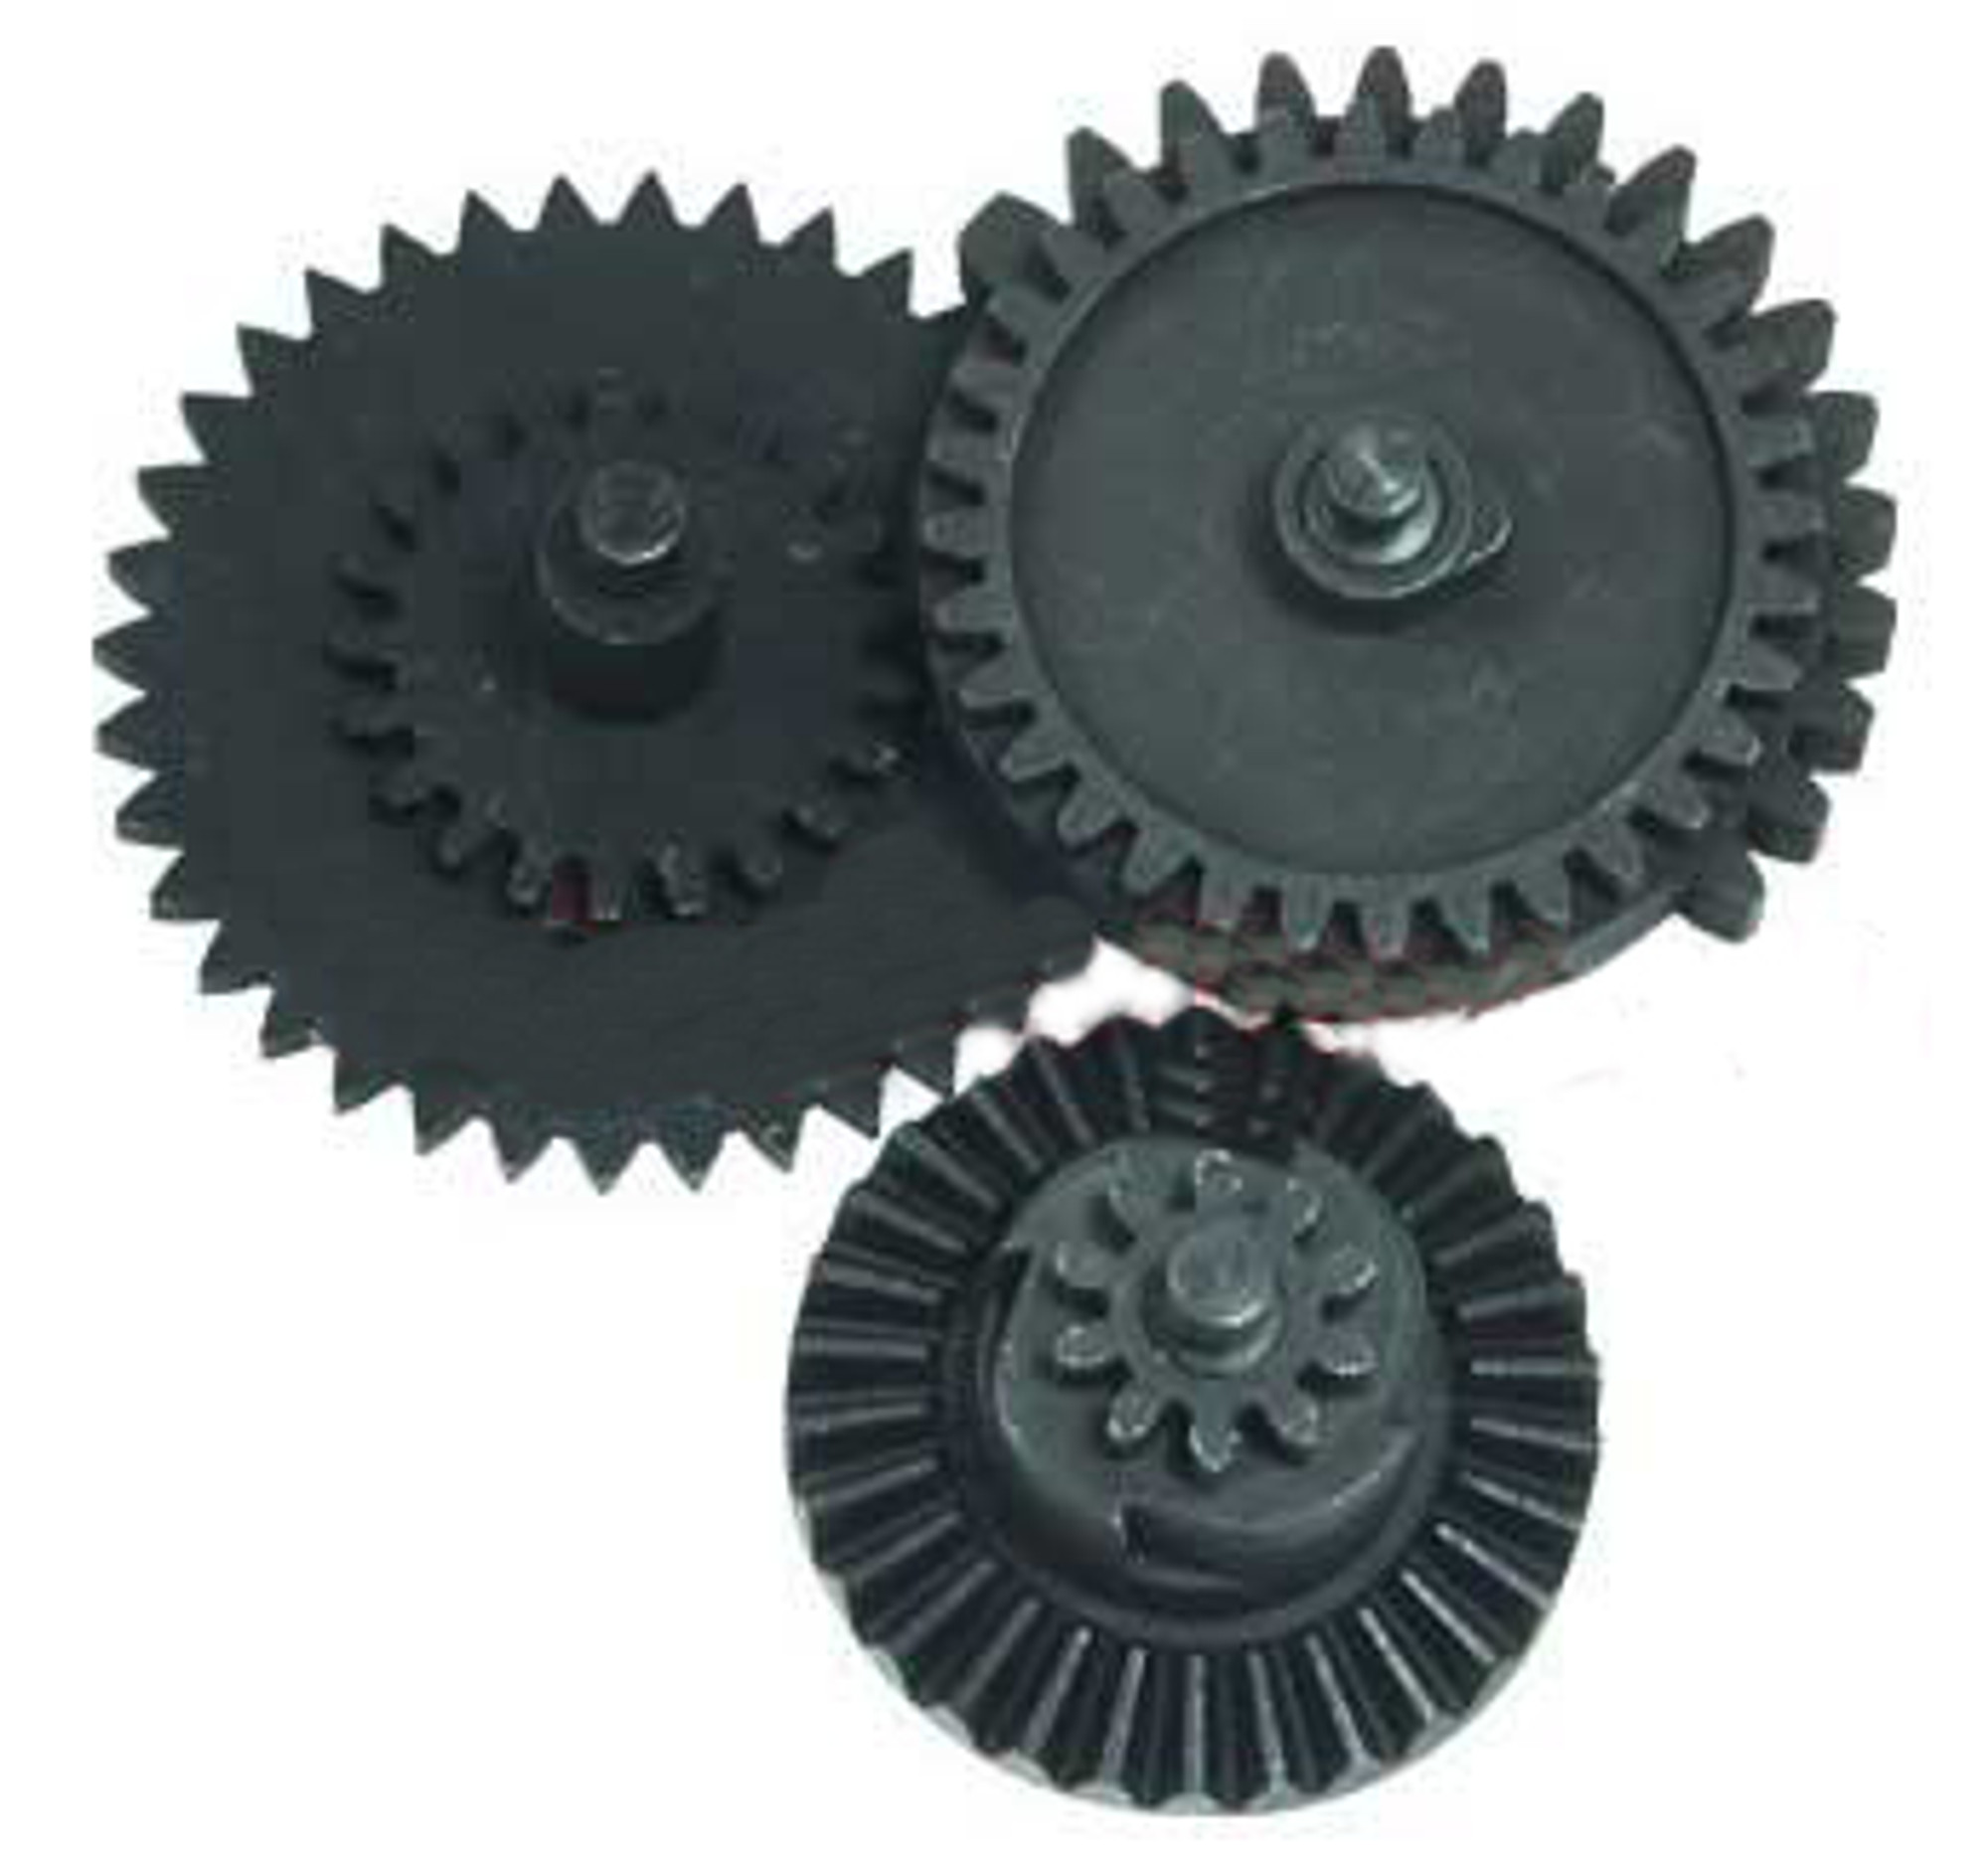 Guarder Steel High Speed Gear Set for Airsoft AEG Gearboxes. (Ver.2  Ver.3)